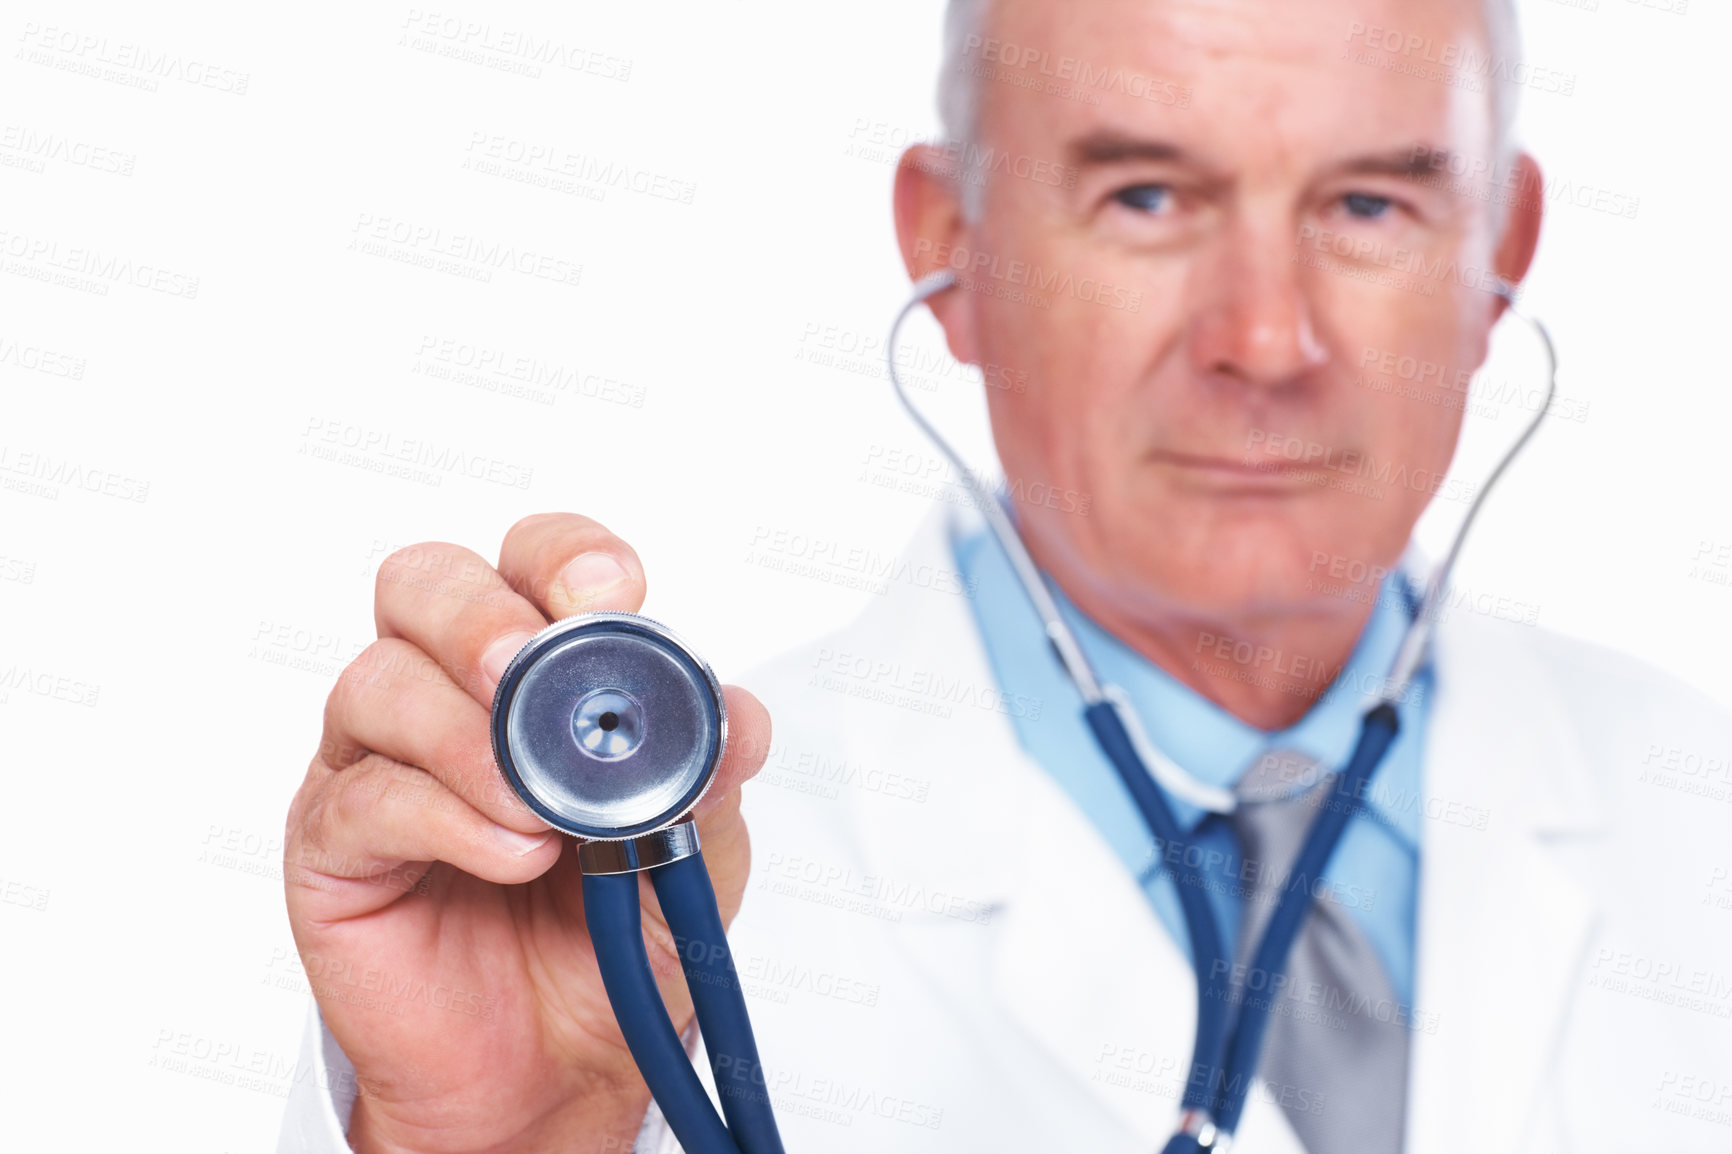 Buy stock photo Portrait of mature male doctor holding stethoscope over white background